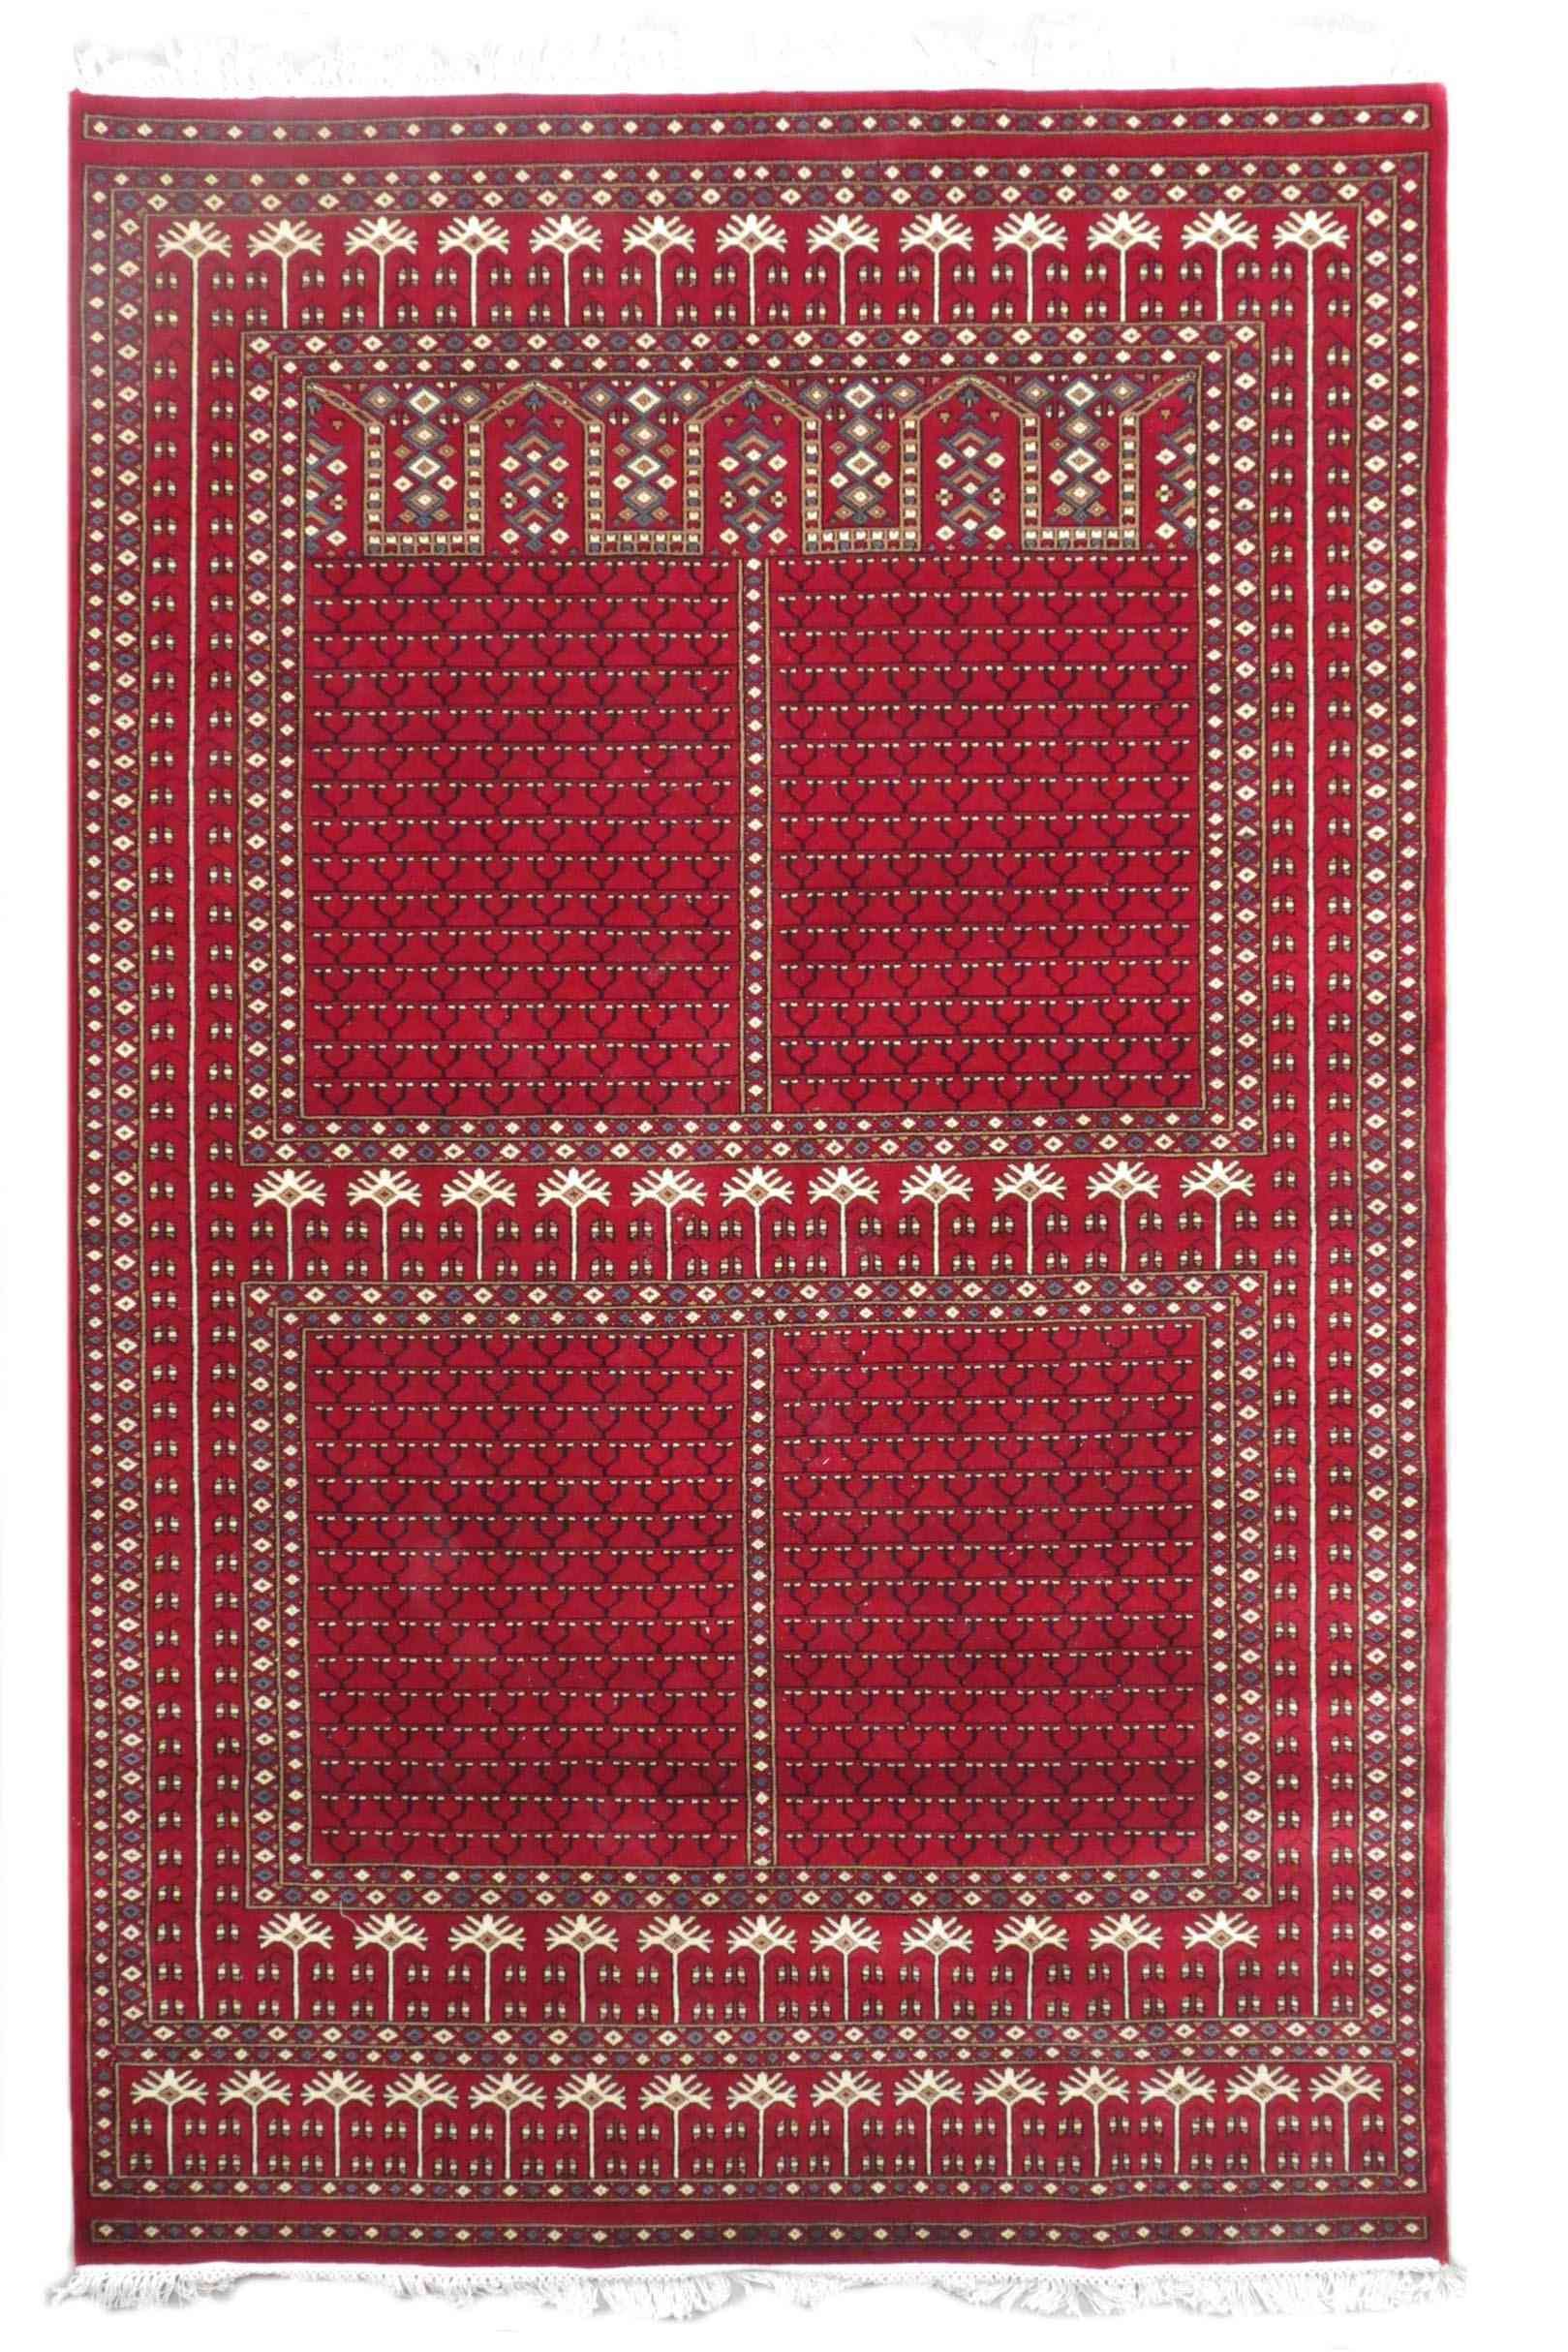 Winds Palace Red Color Jaipur Rugs